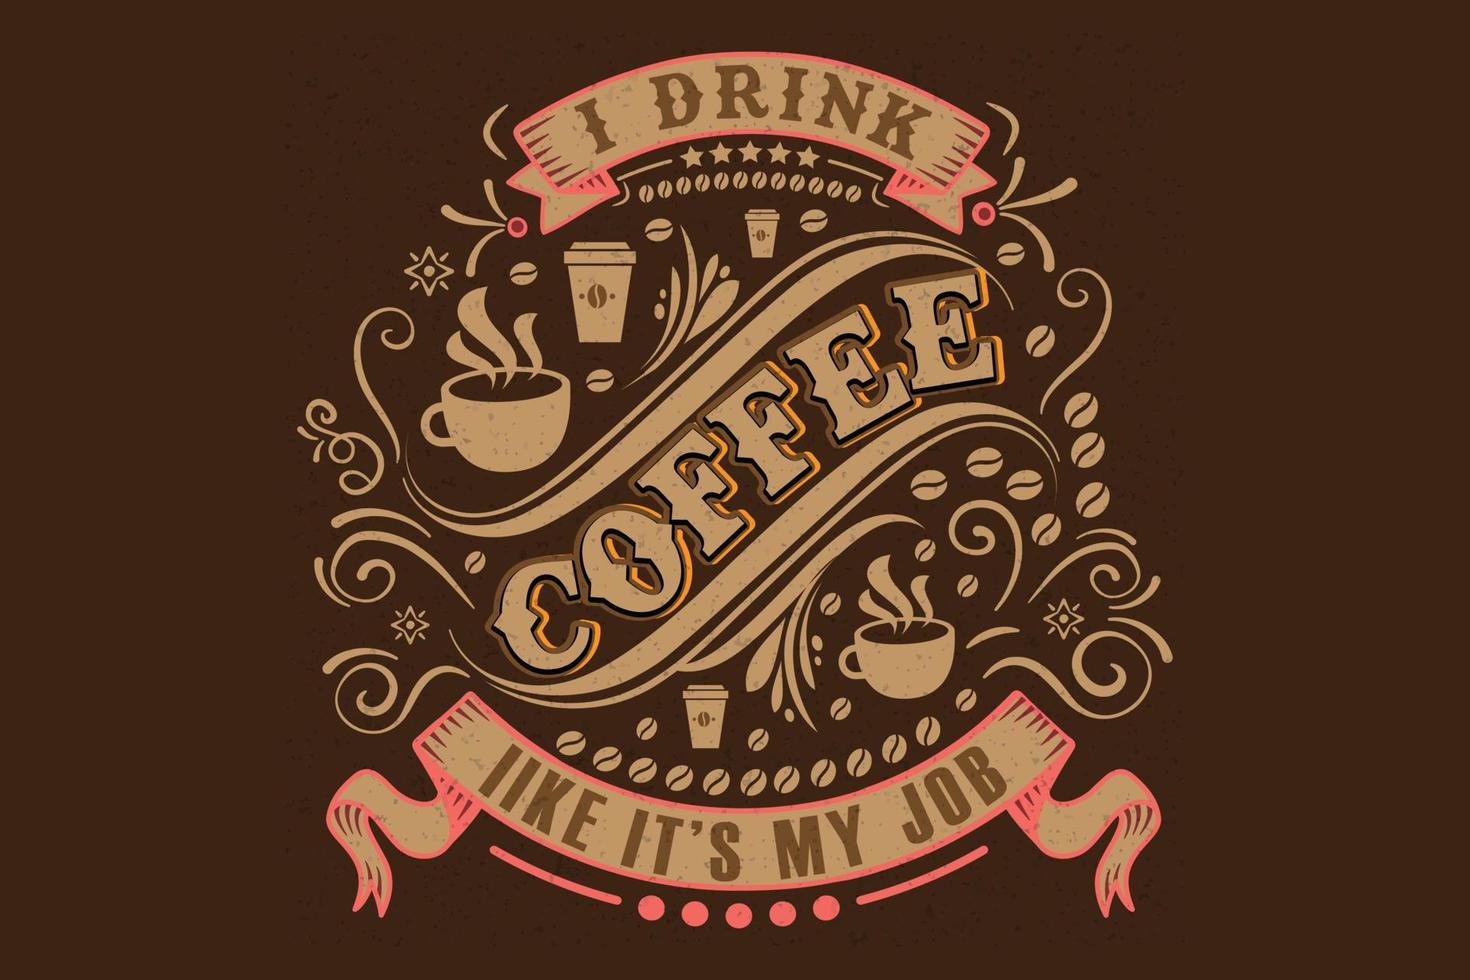 offee Quote. Drink Coffee Like it's My job, Vintage print with grunge texture and lettering. This illustration can be used as a print or T-shirts, posters, greeting card vector